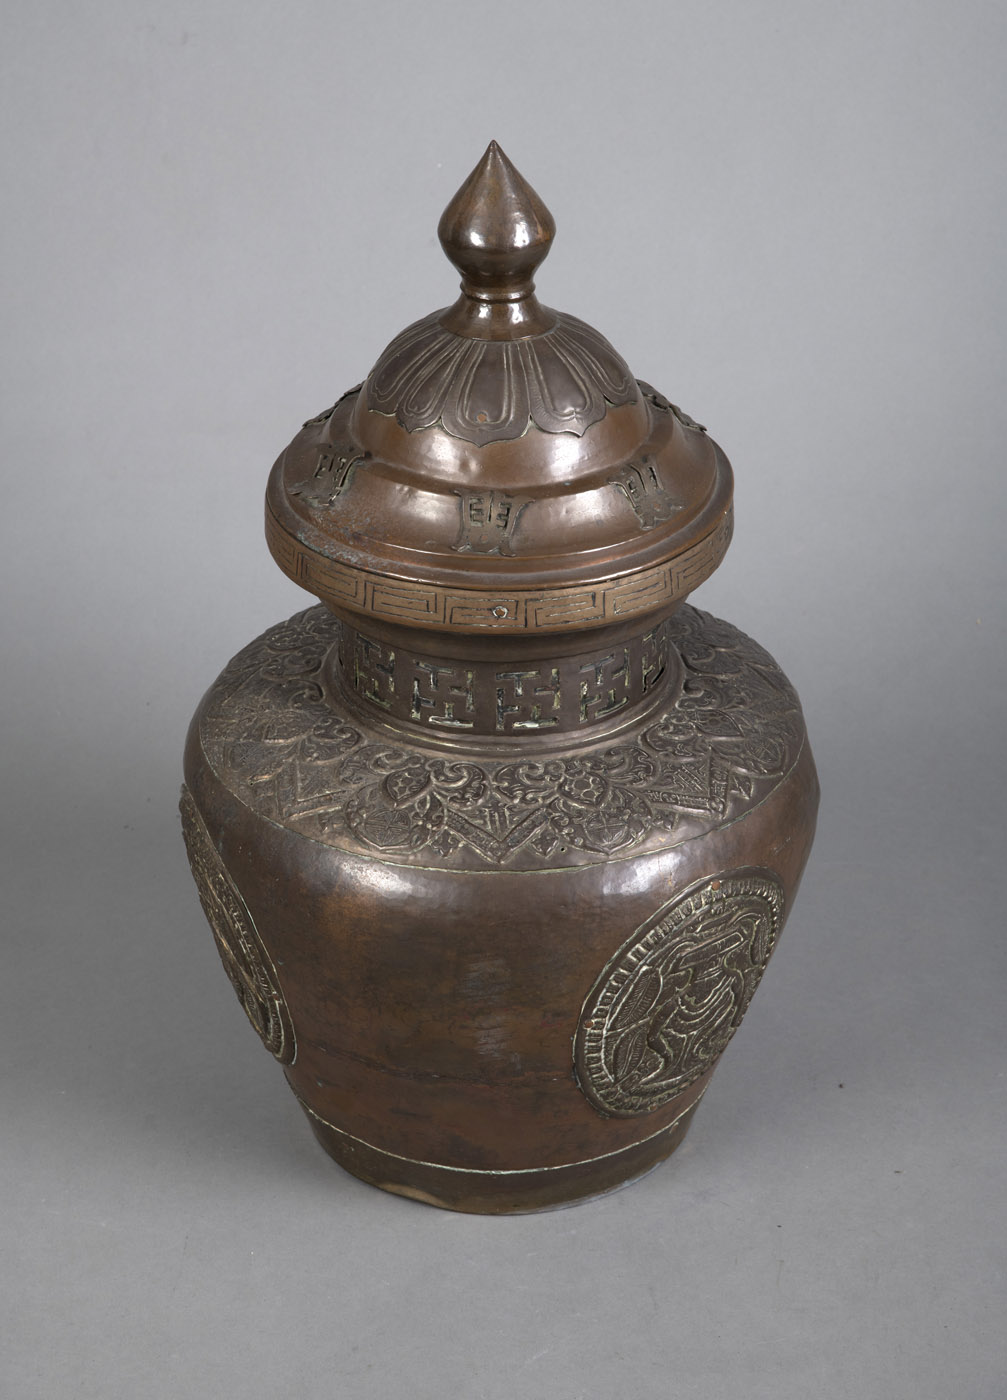 A LARGE EMBOSSED COPPER AND BRASS STORAGE VESSEL WITH SURROUNDING SWASTIKA AND "SHOU" CHARACTER DEC - Image 3 of 4